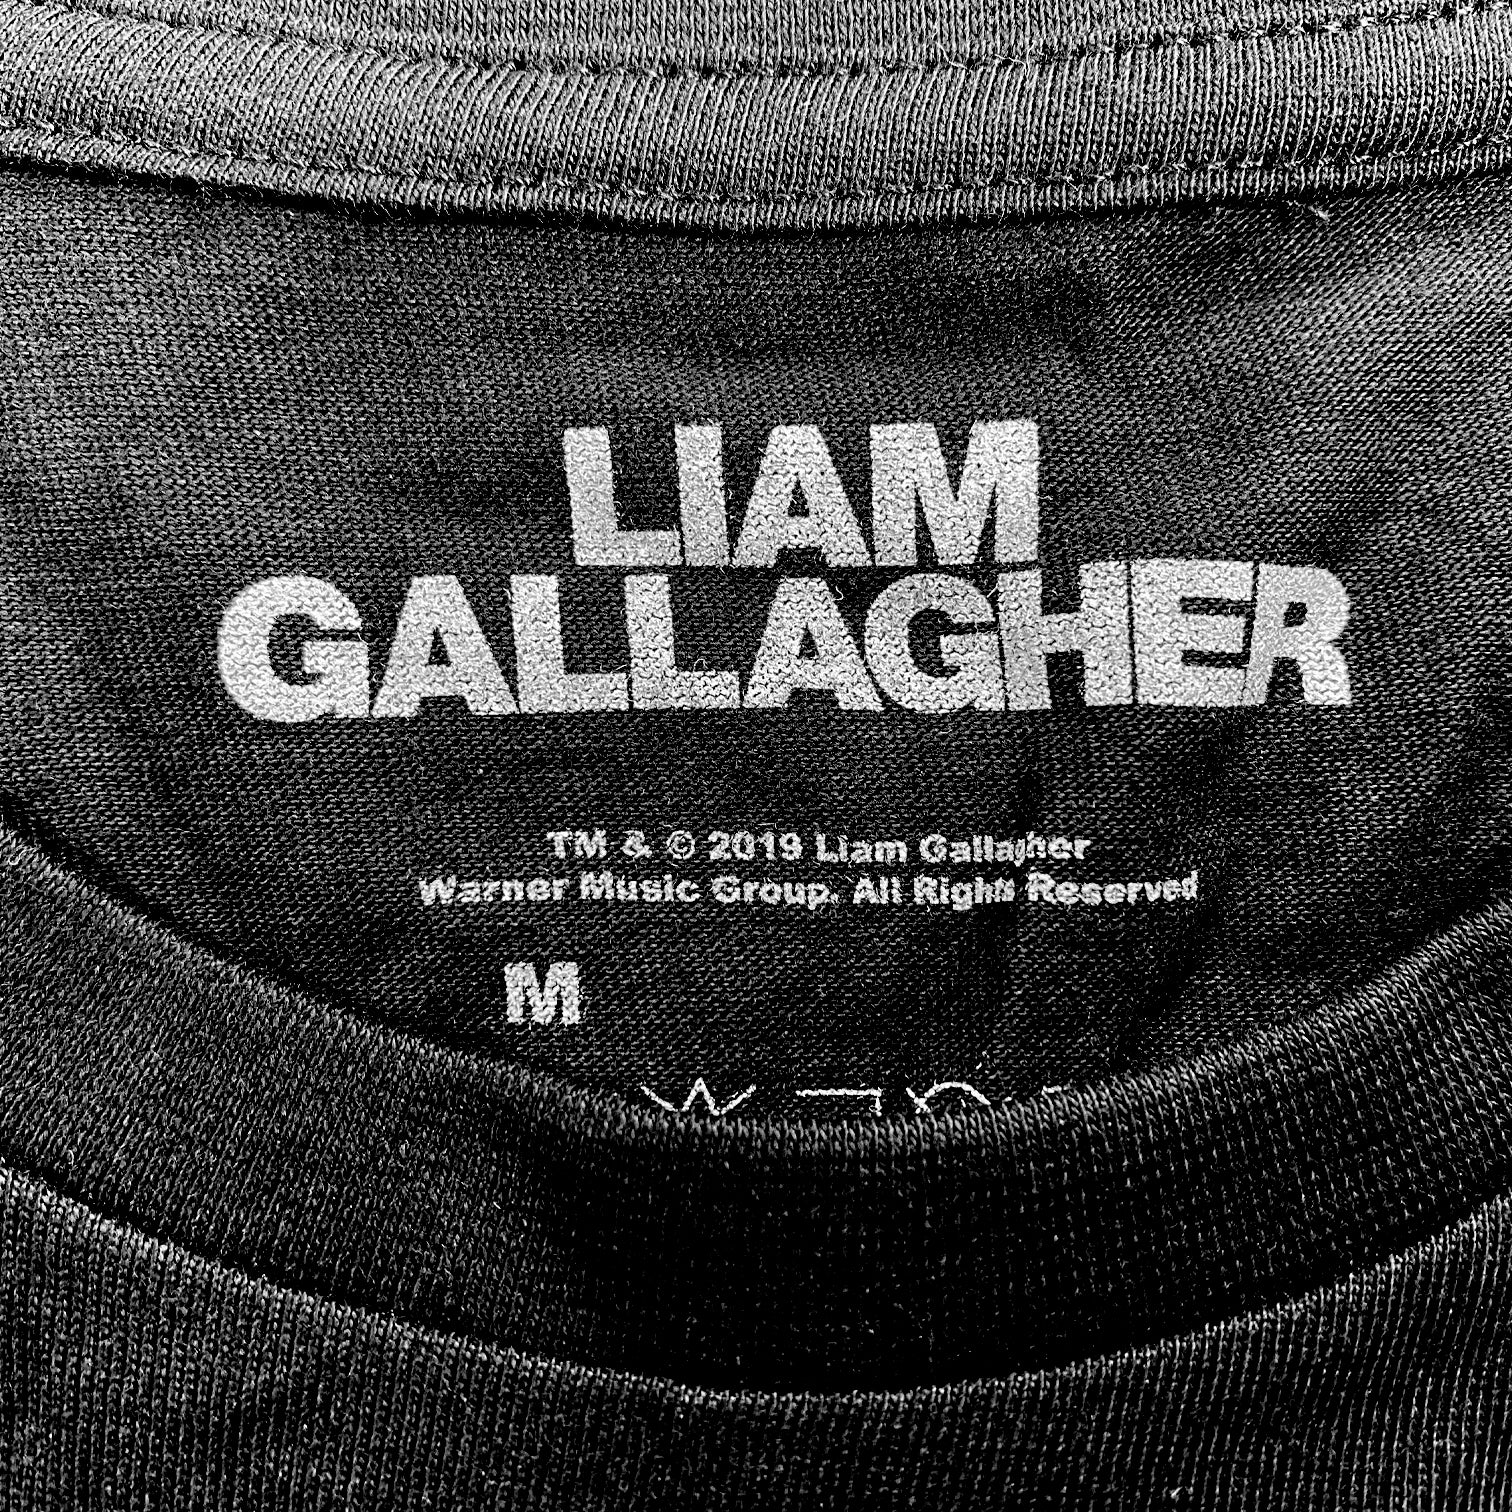 Who The Fuck Is Liam Gallagher? T Shirt - Black - End Of Line